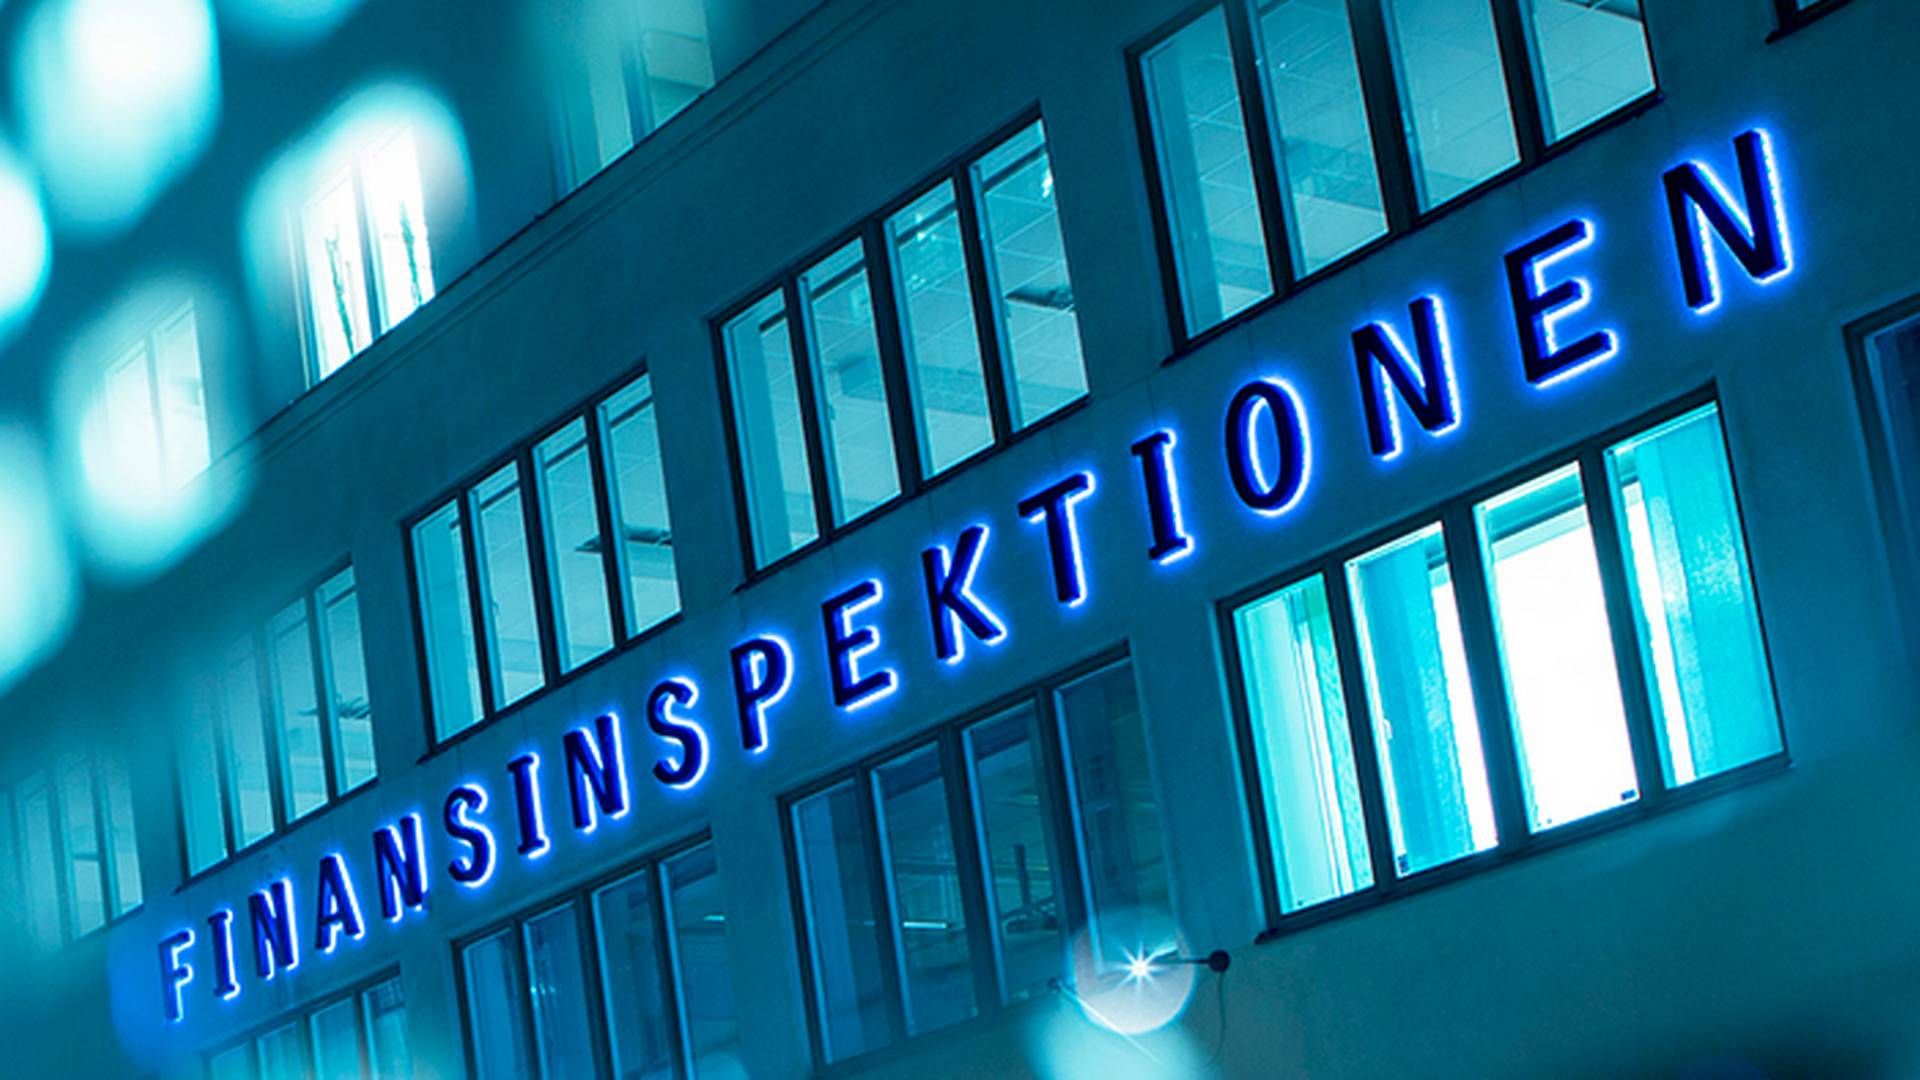 The Swedish FSA, Finansinspektionen, has launched a number of further investigations into investments in the troubled real estate giant, Heimstaden Bostad. | Photo: Finansinspektionen / PR